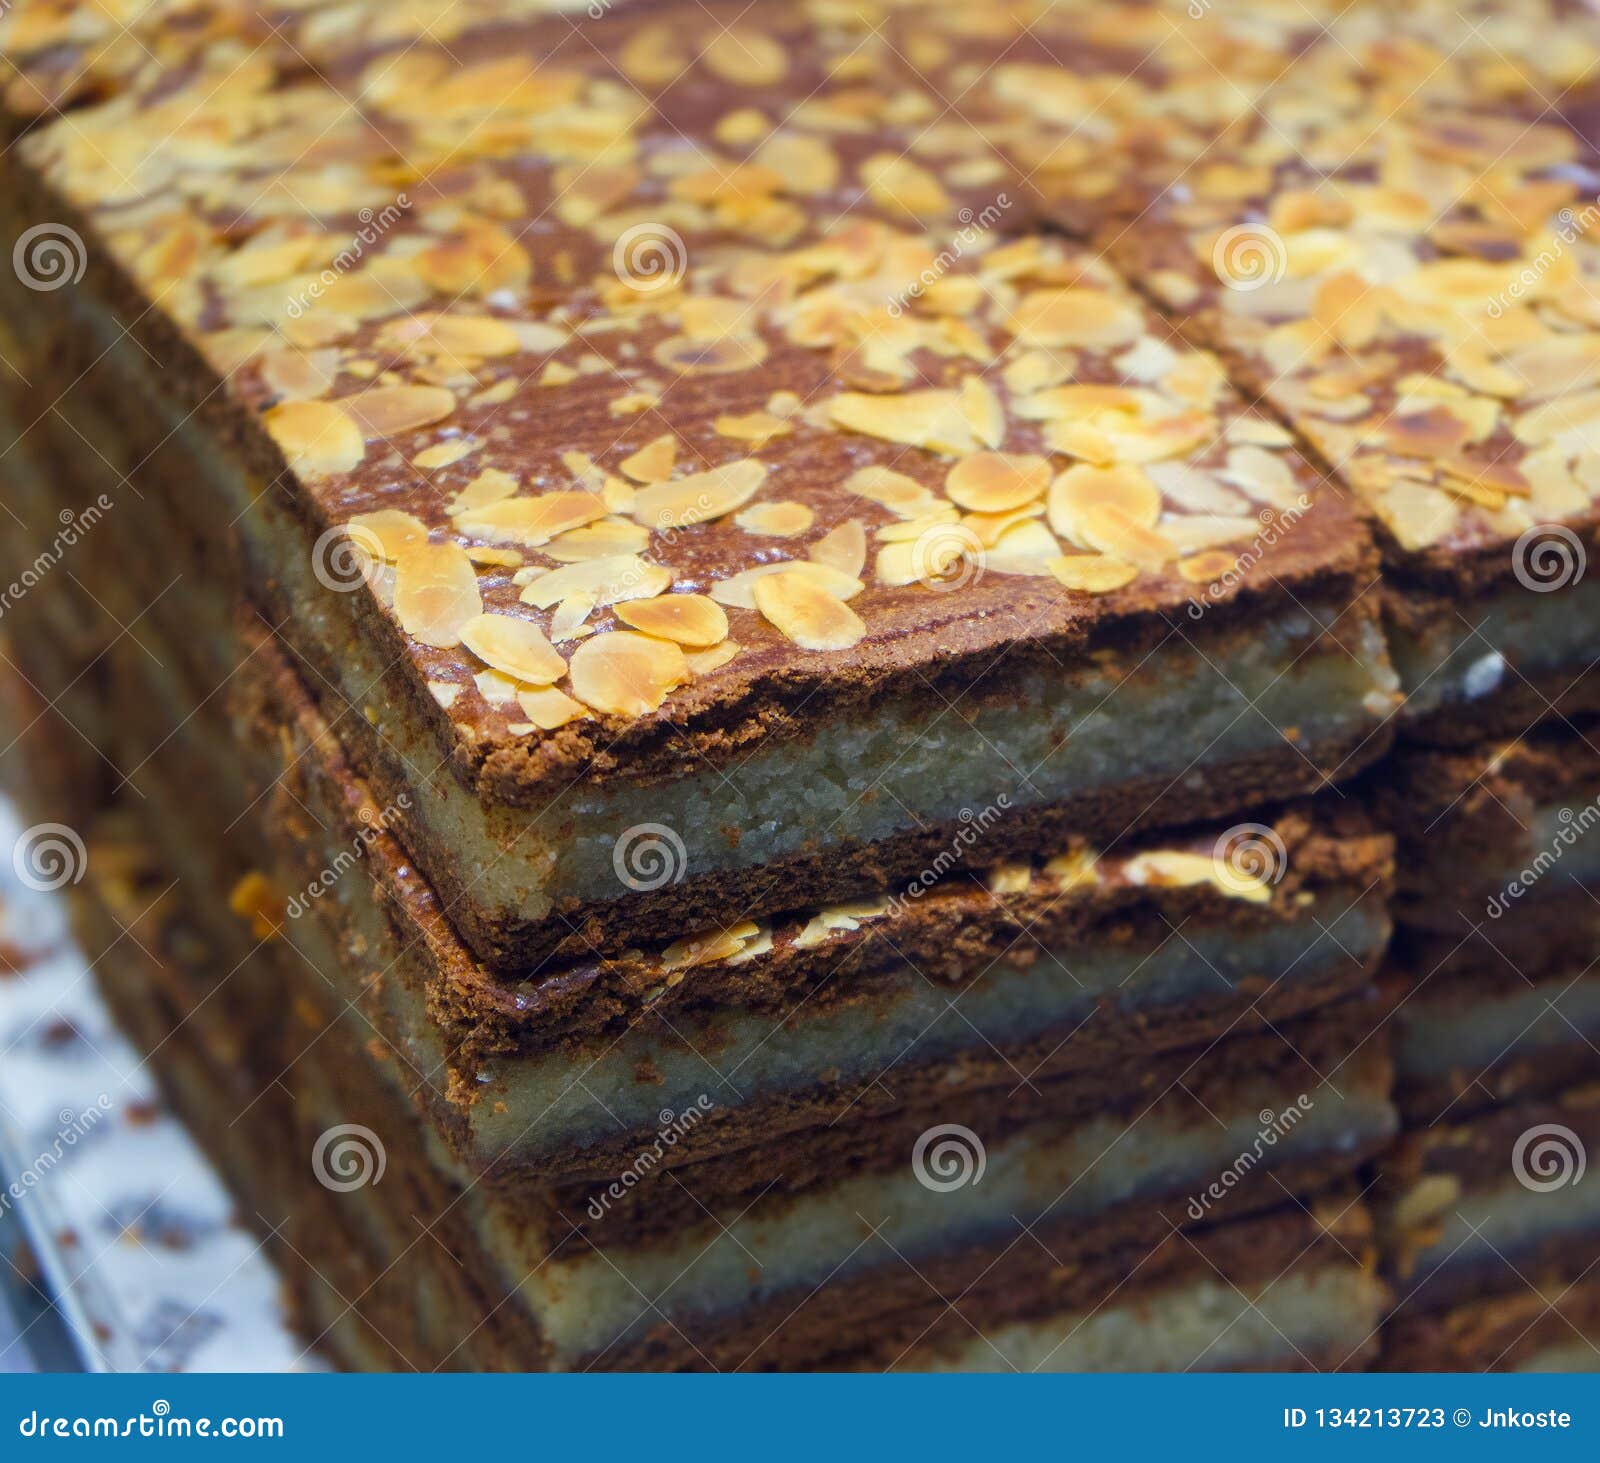 Kamer Geven Abstractie Gevuld Speculaas Dutch Sweet Cookie Netherlands Traditional Food Stock  Image - Image of tasty, filled: 134213723